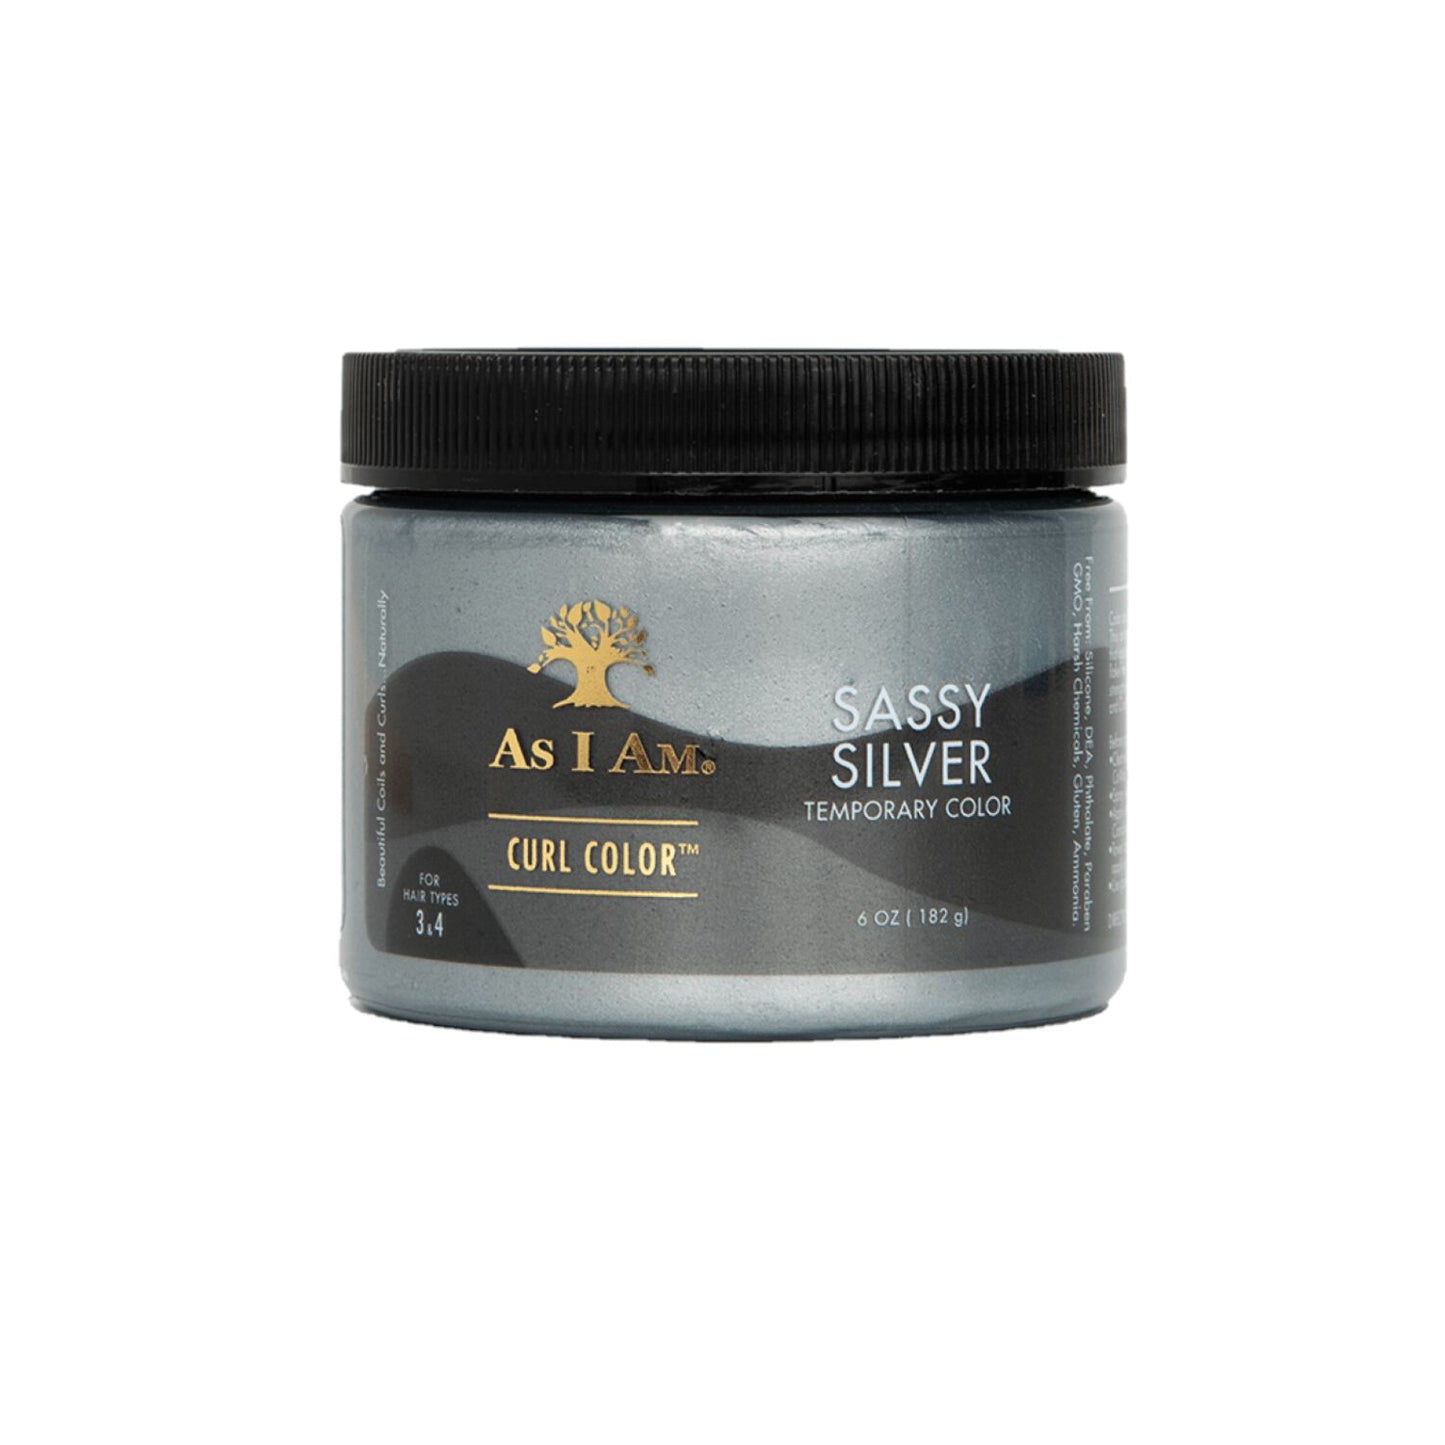 As I Am Curl Color - Sassy Silver - 6 ounce - Color & Curling Gel - Temporary Color - Vegan & Cruelty Free